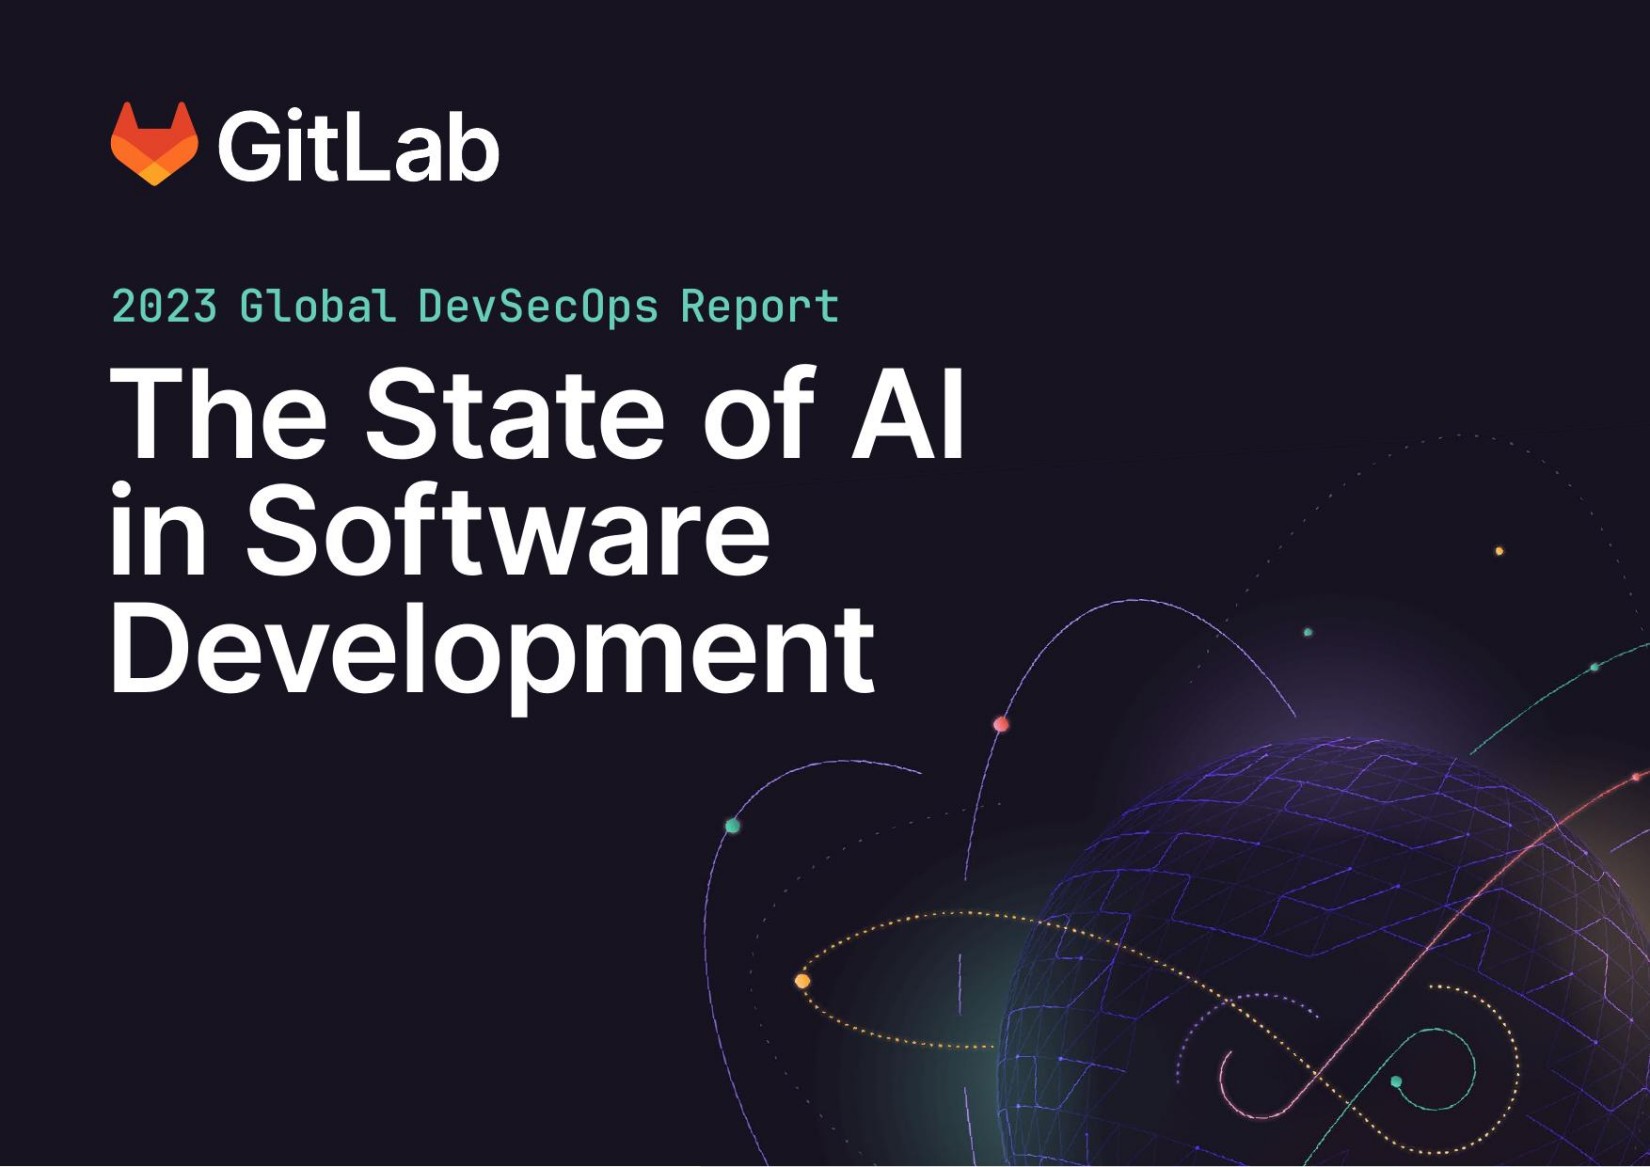 The State of AI in Software Development